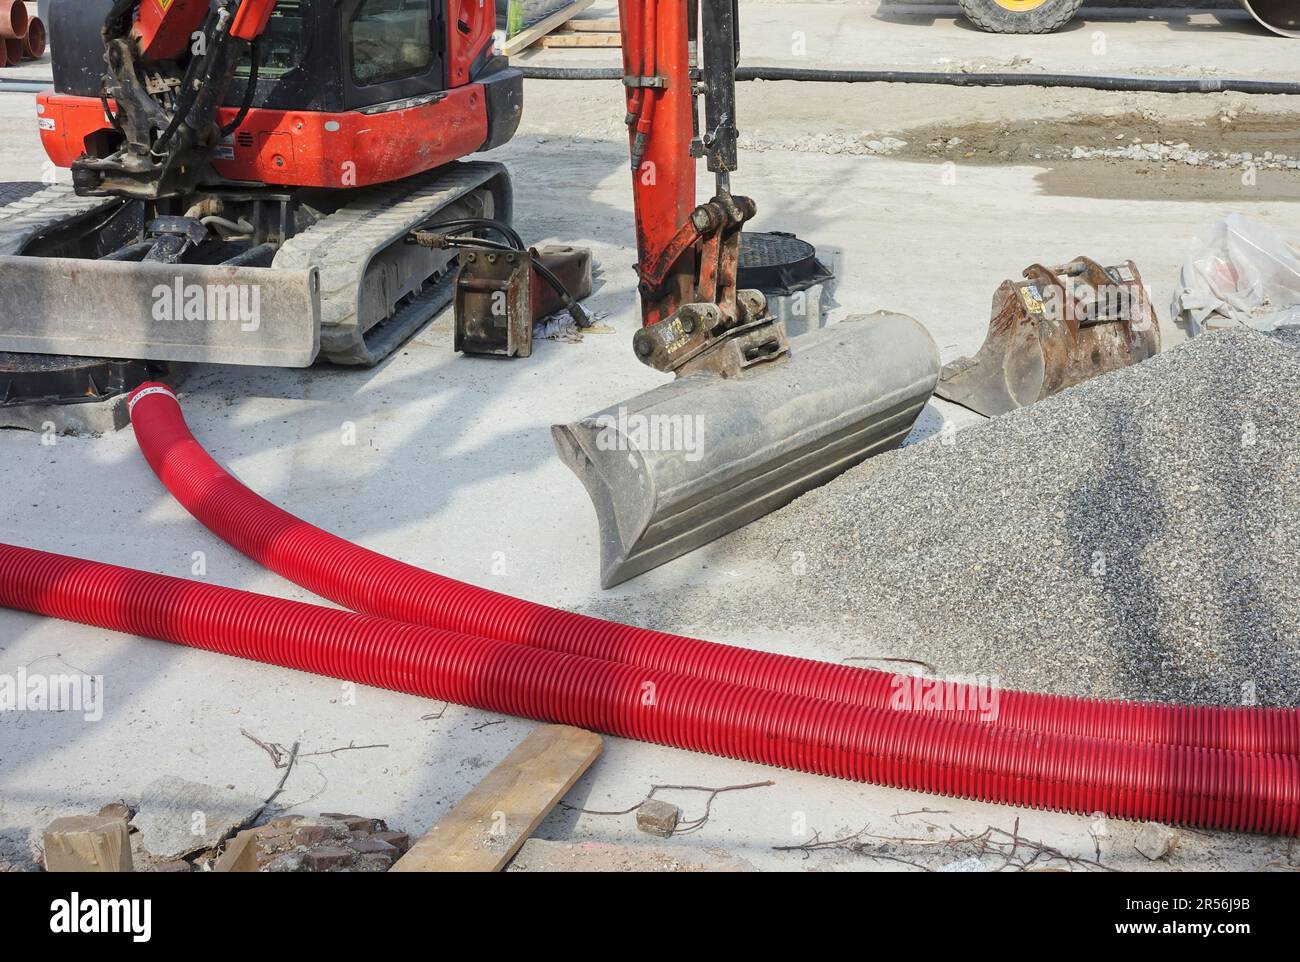 road works with plastic pipes for electric cables, gravel and excavator Stock Photo